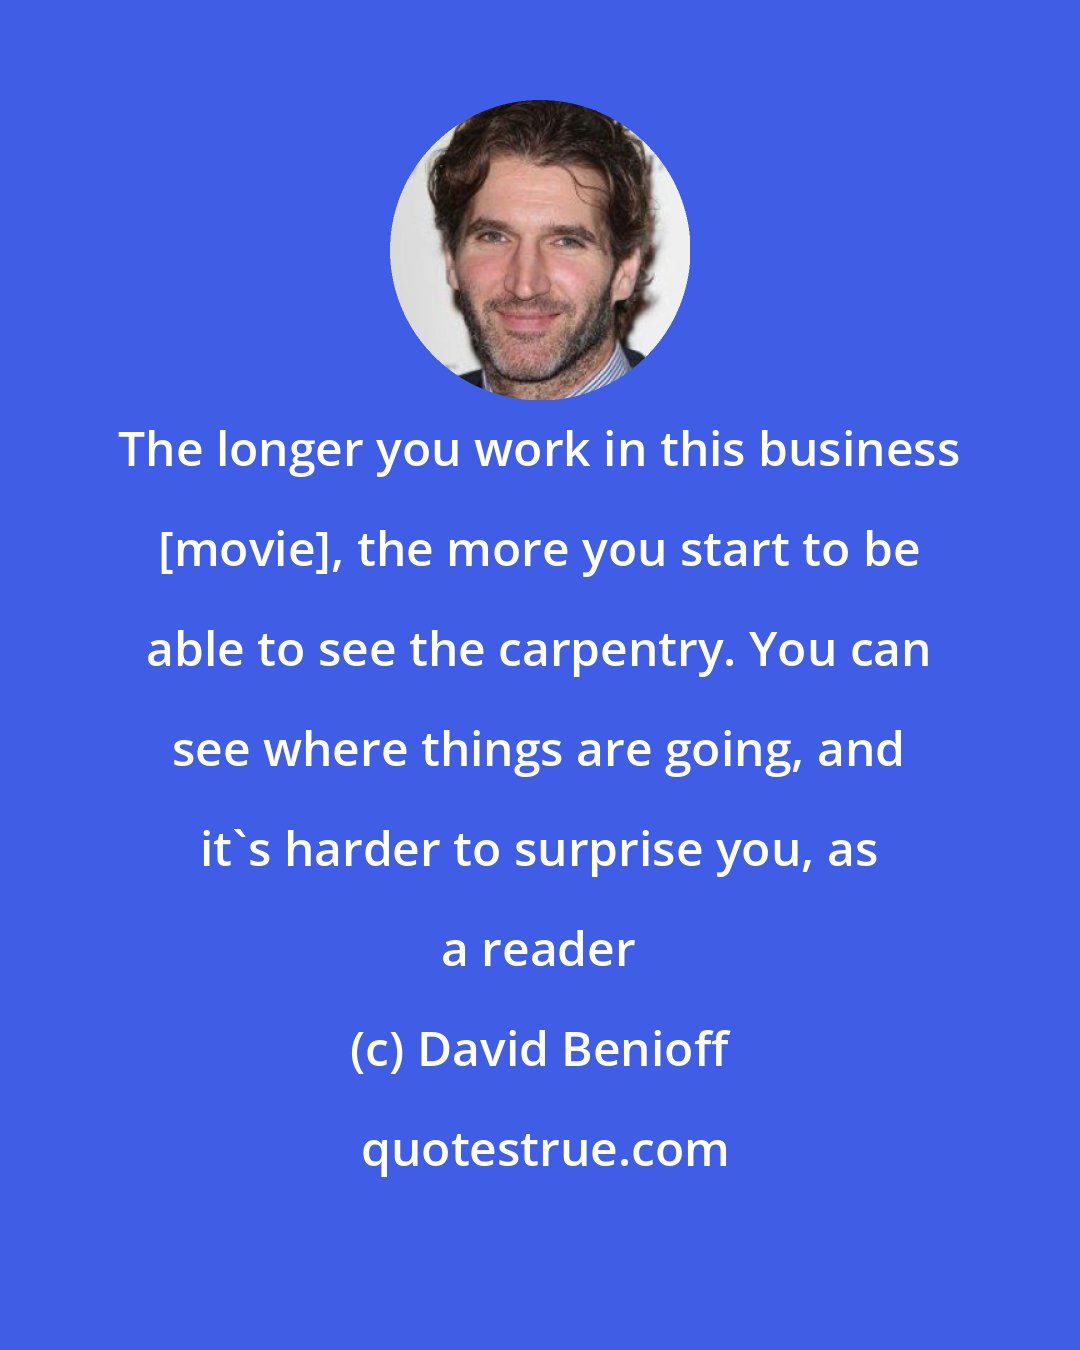 David Benioff: The longer you work in this business [movie], the more you start to be able to see the carpentry. You can see where things are going, and it's harder to surprise you, as a reader